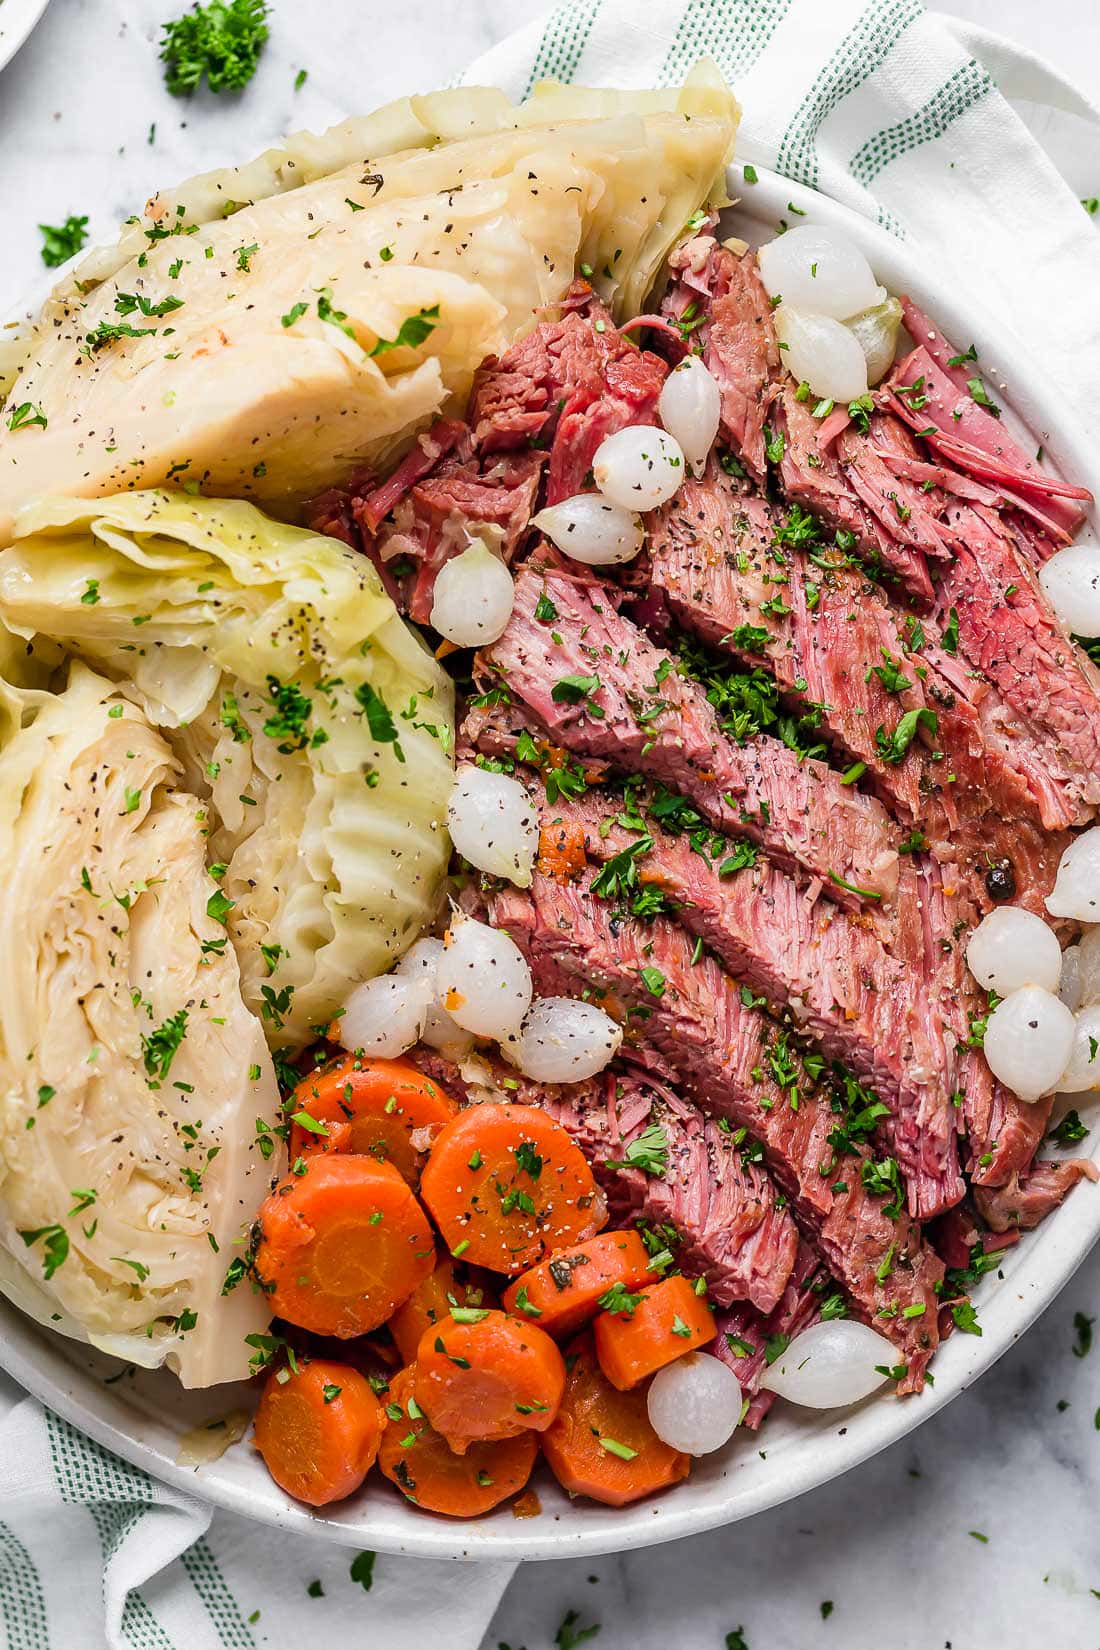 A plate of corned beef, cabbage, carrots, and onions